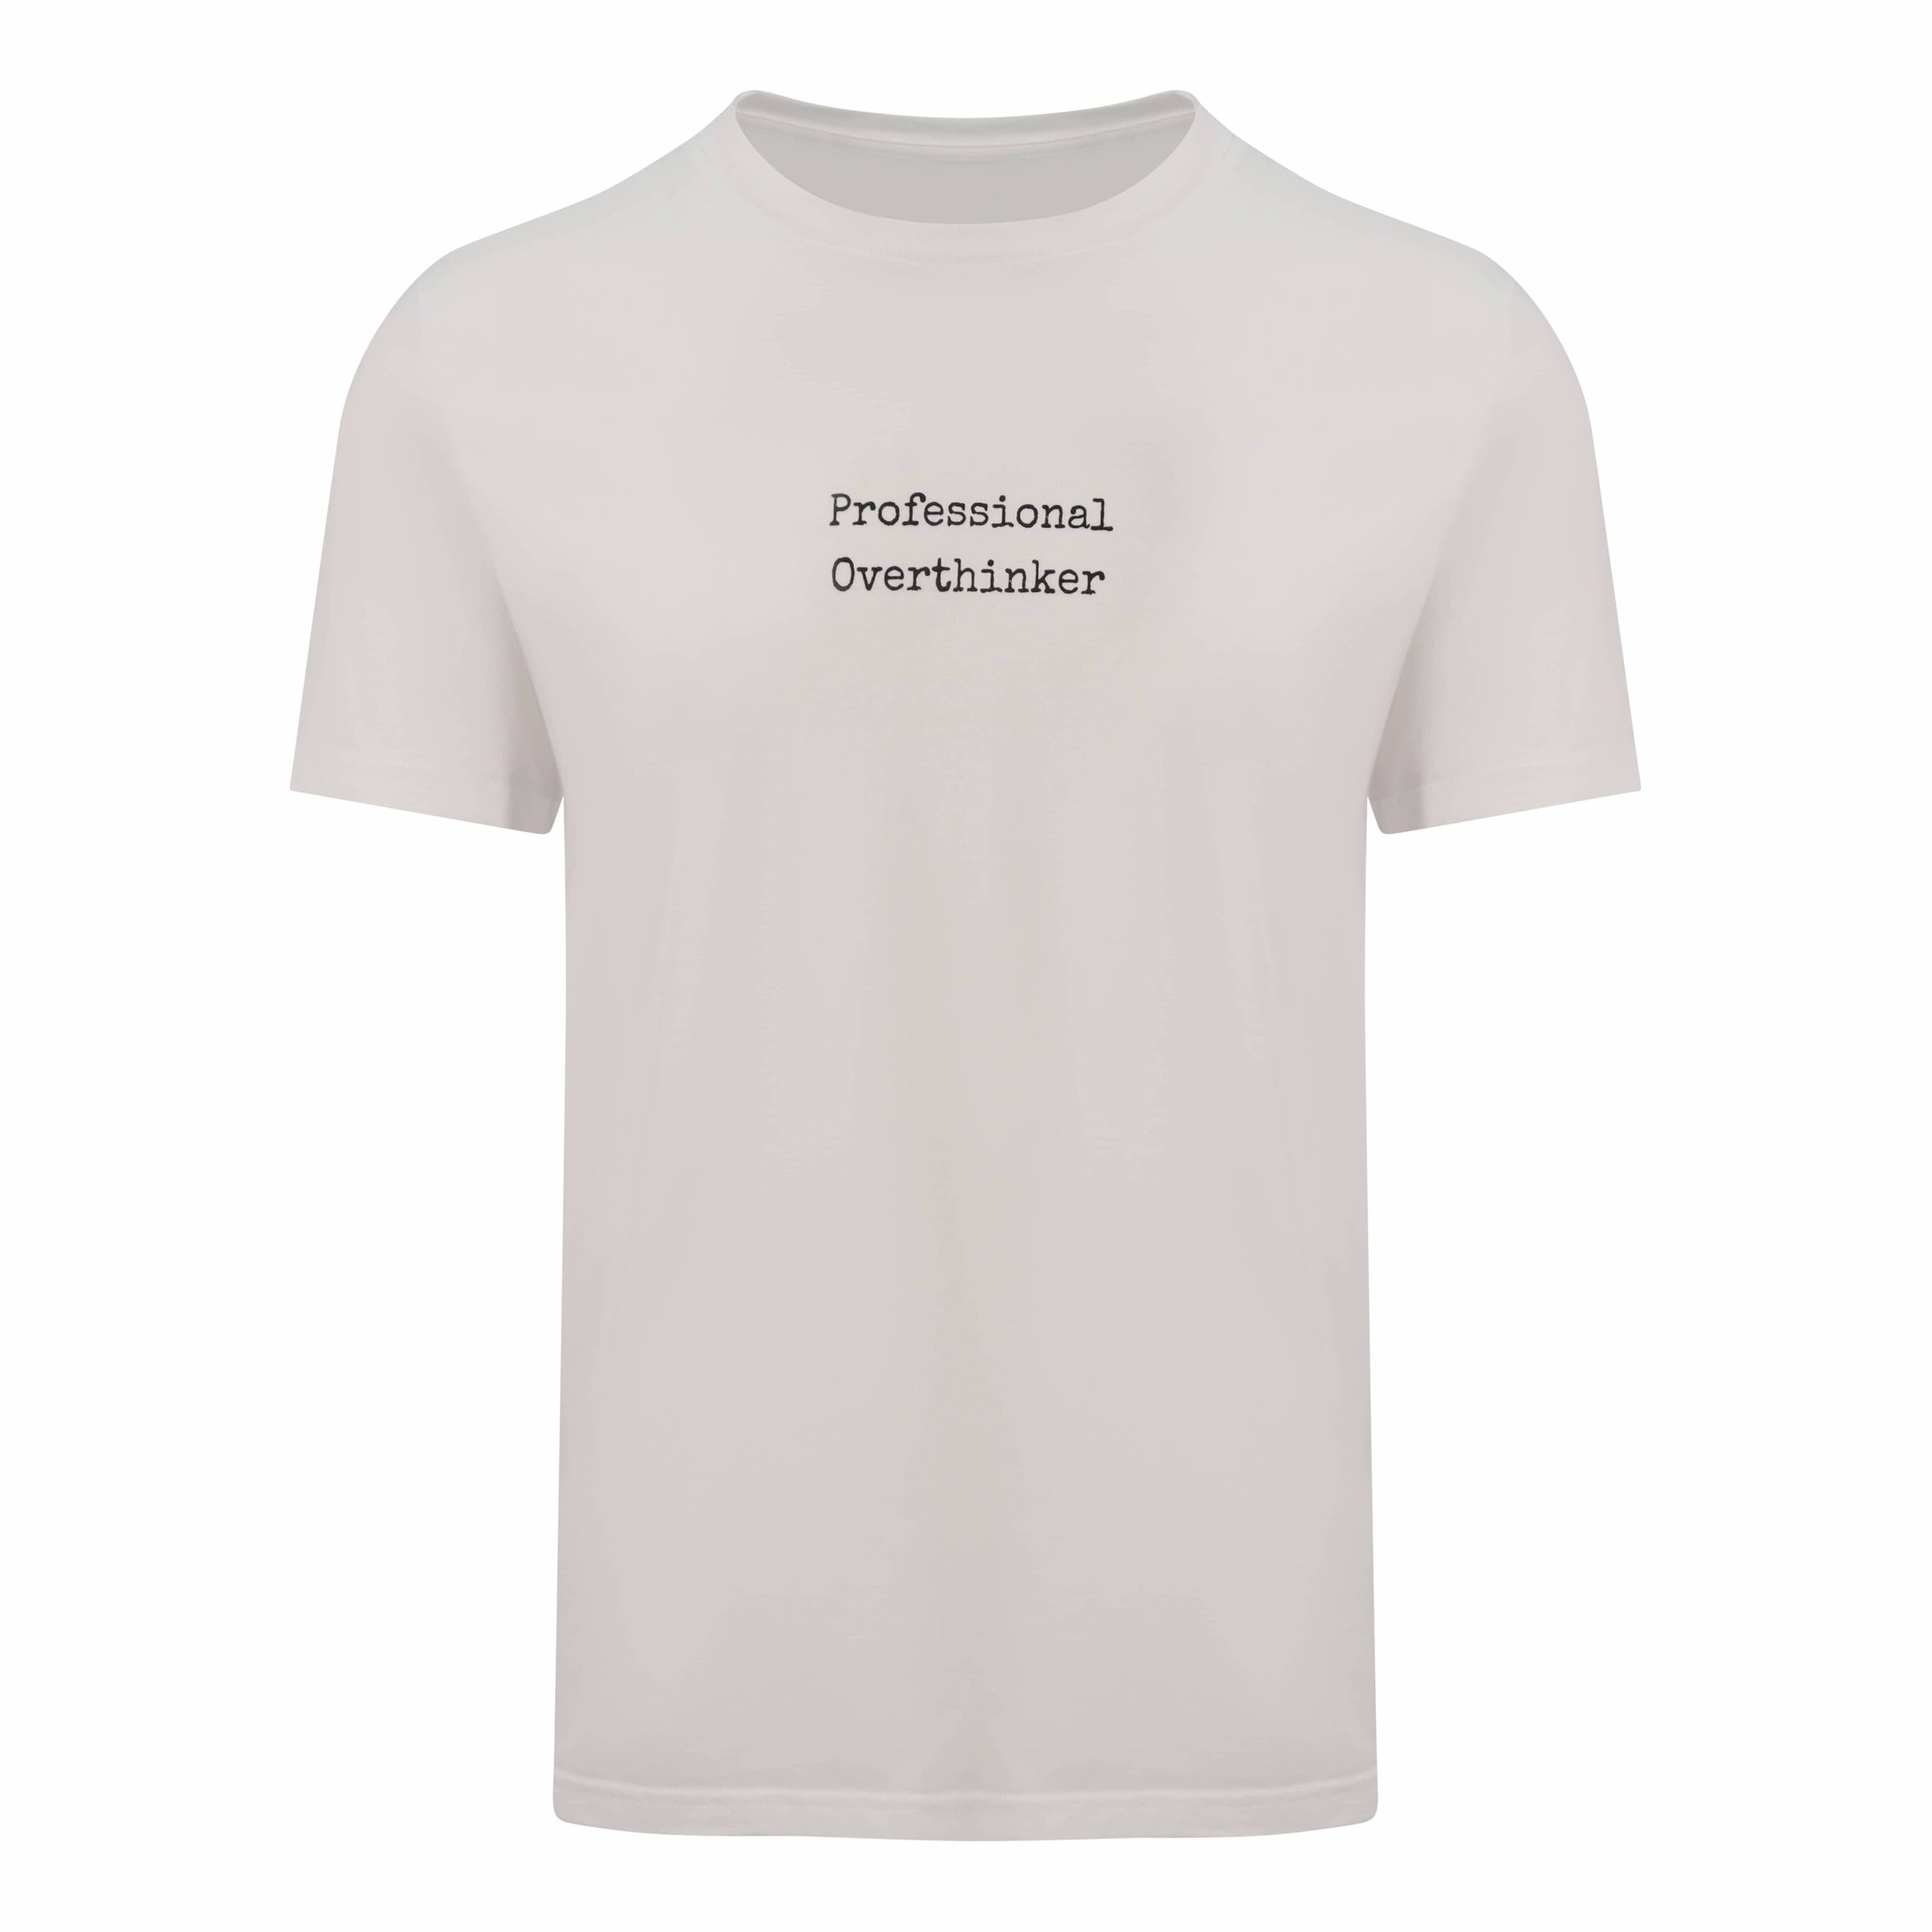 Arctic White Organic T-Shirt that reads professional overthinker in a typewriter style font. Professional Thinker takes up the middle section of the chest and is a small style size to not take up to much of the t-shirt